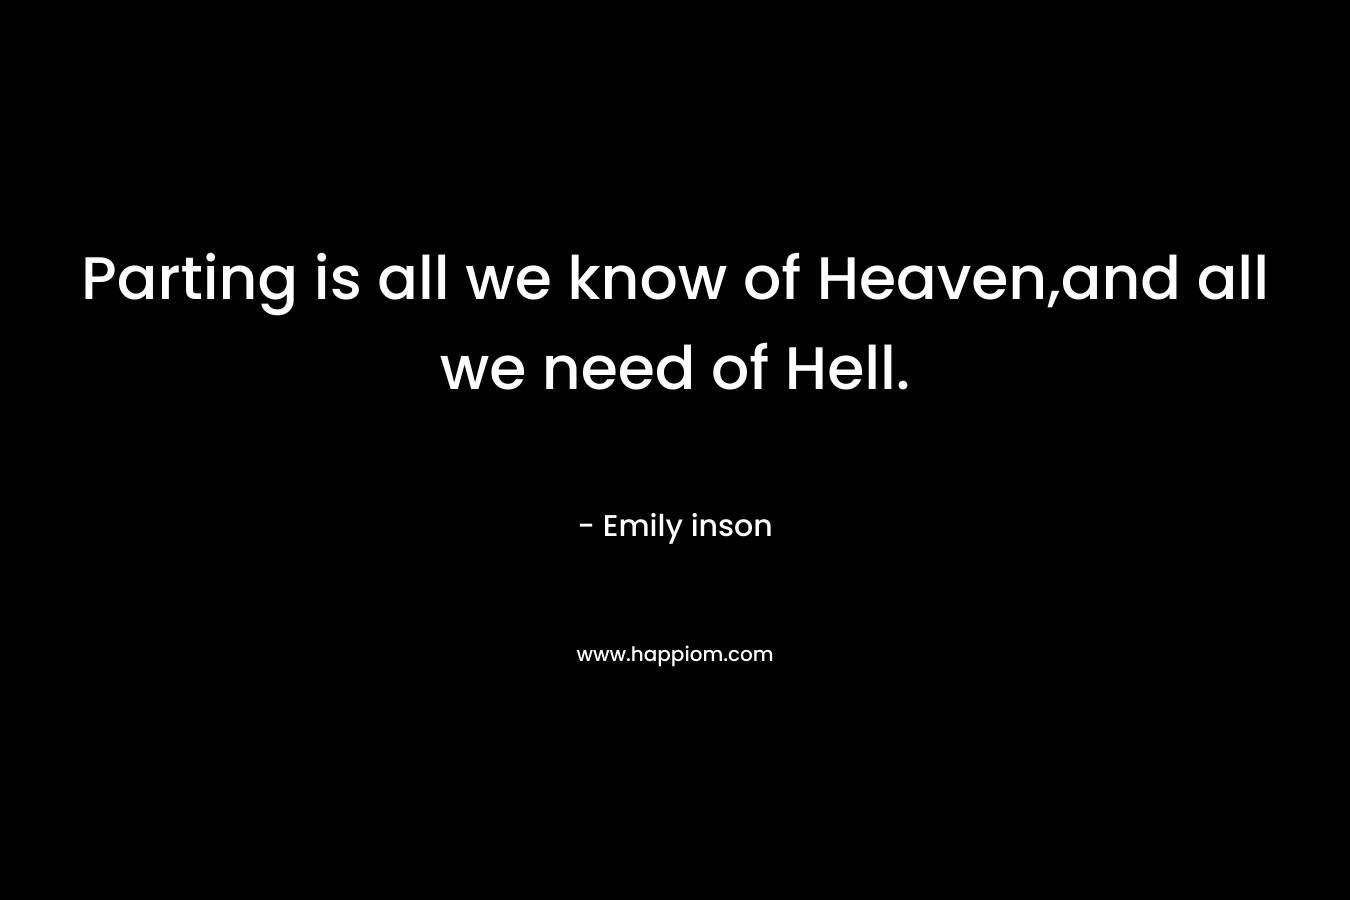 Parting is all we know of Heaven,and all we need of Hell. – Emily inson